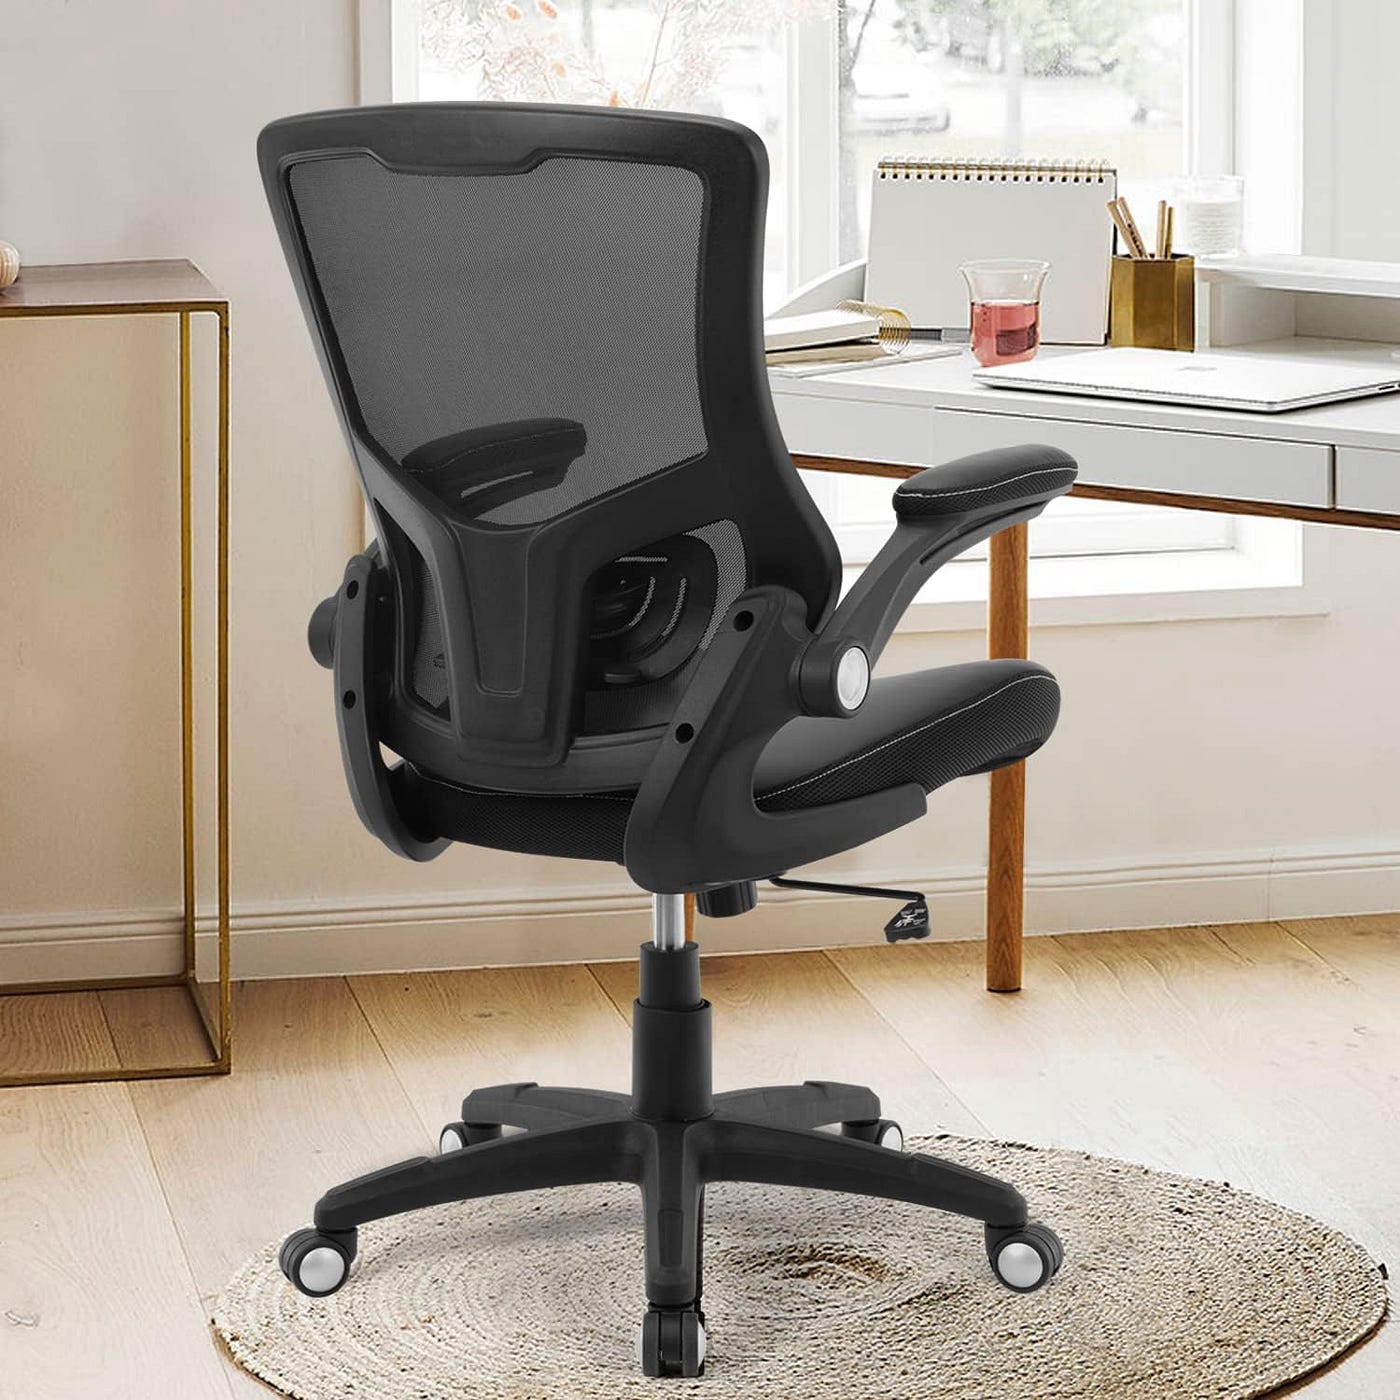 Office Chair Ergonomic Desk Chair, Computer PU Leather Home Office Chair, Swivel Mesh Back Adjustable Lumbar Support Flip-up Arms Executive Task Chair